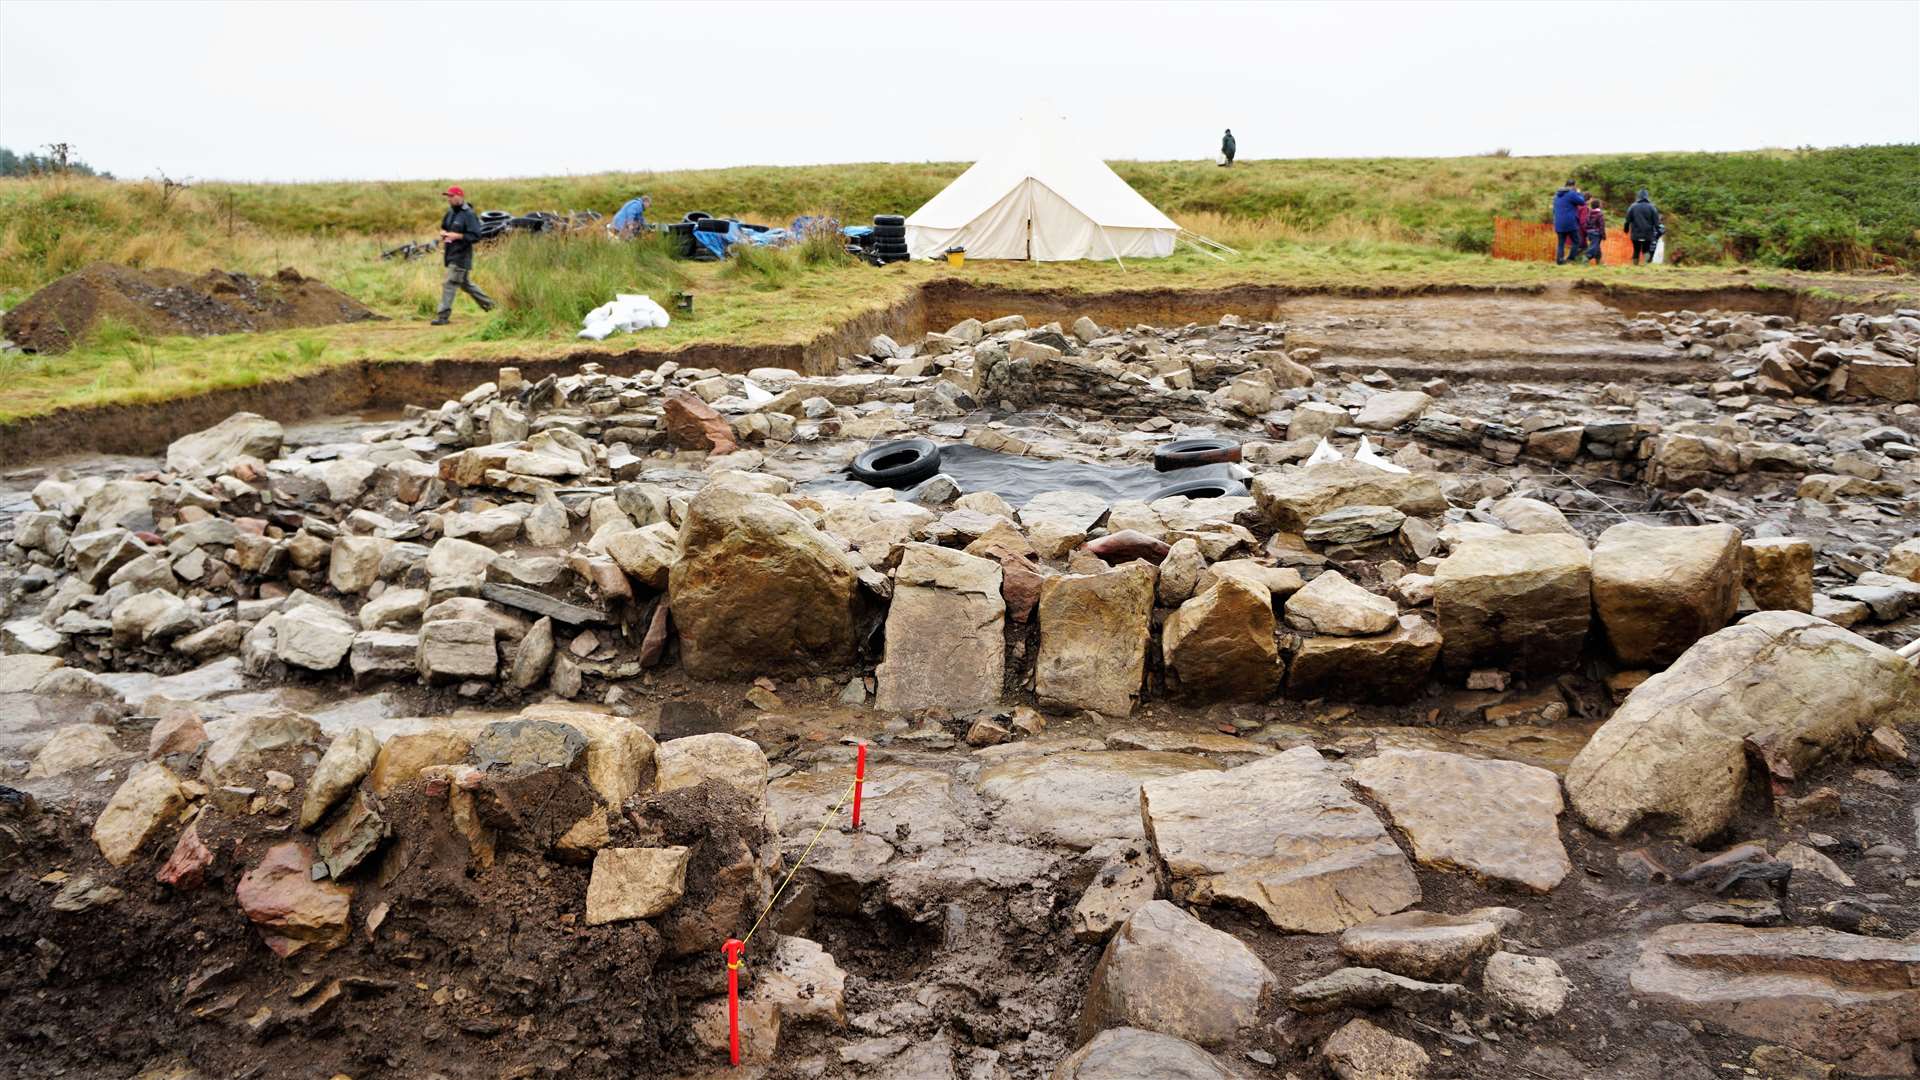 The site at Swartigill is regarded as one of the most exciting archaeological finds in Caithness. Picture: DGS